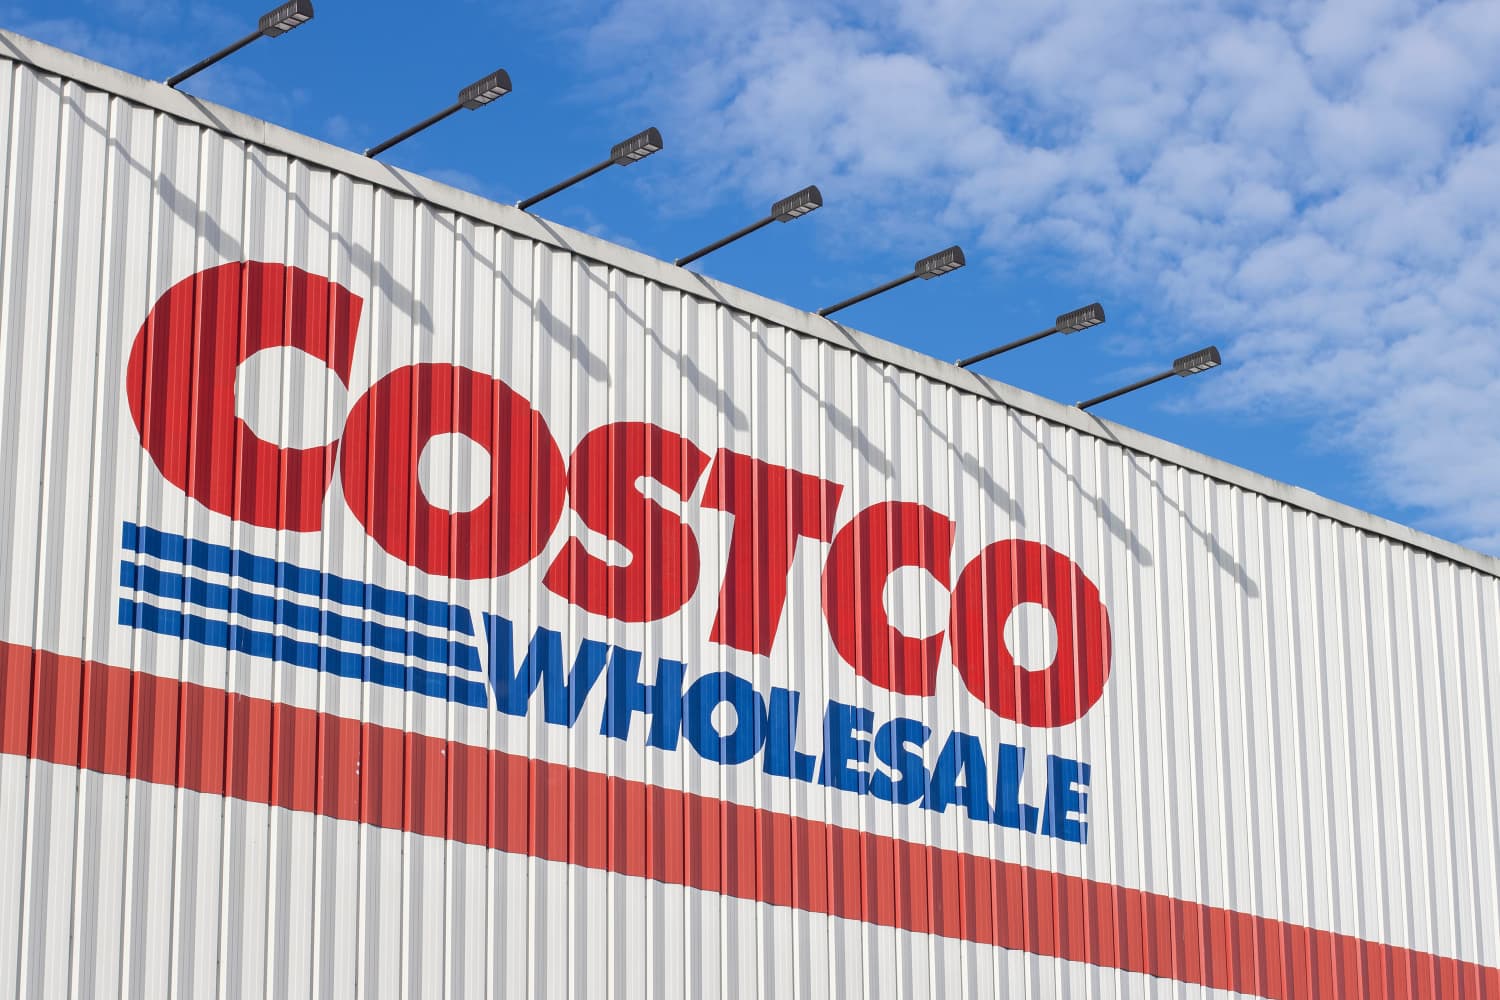 Costco’s Brilliant Screen Door Is Back in Stock, and Shoppers Say It’s a “Total Win!”